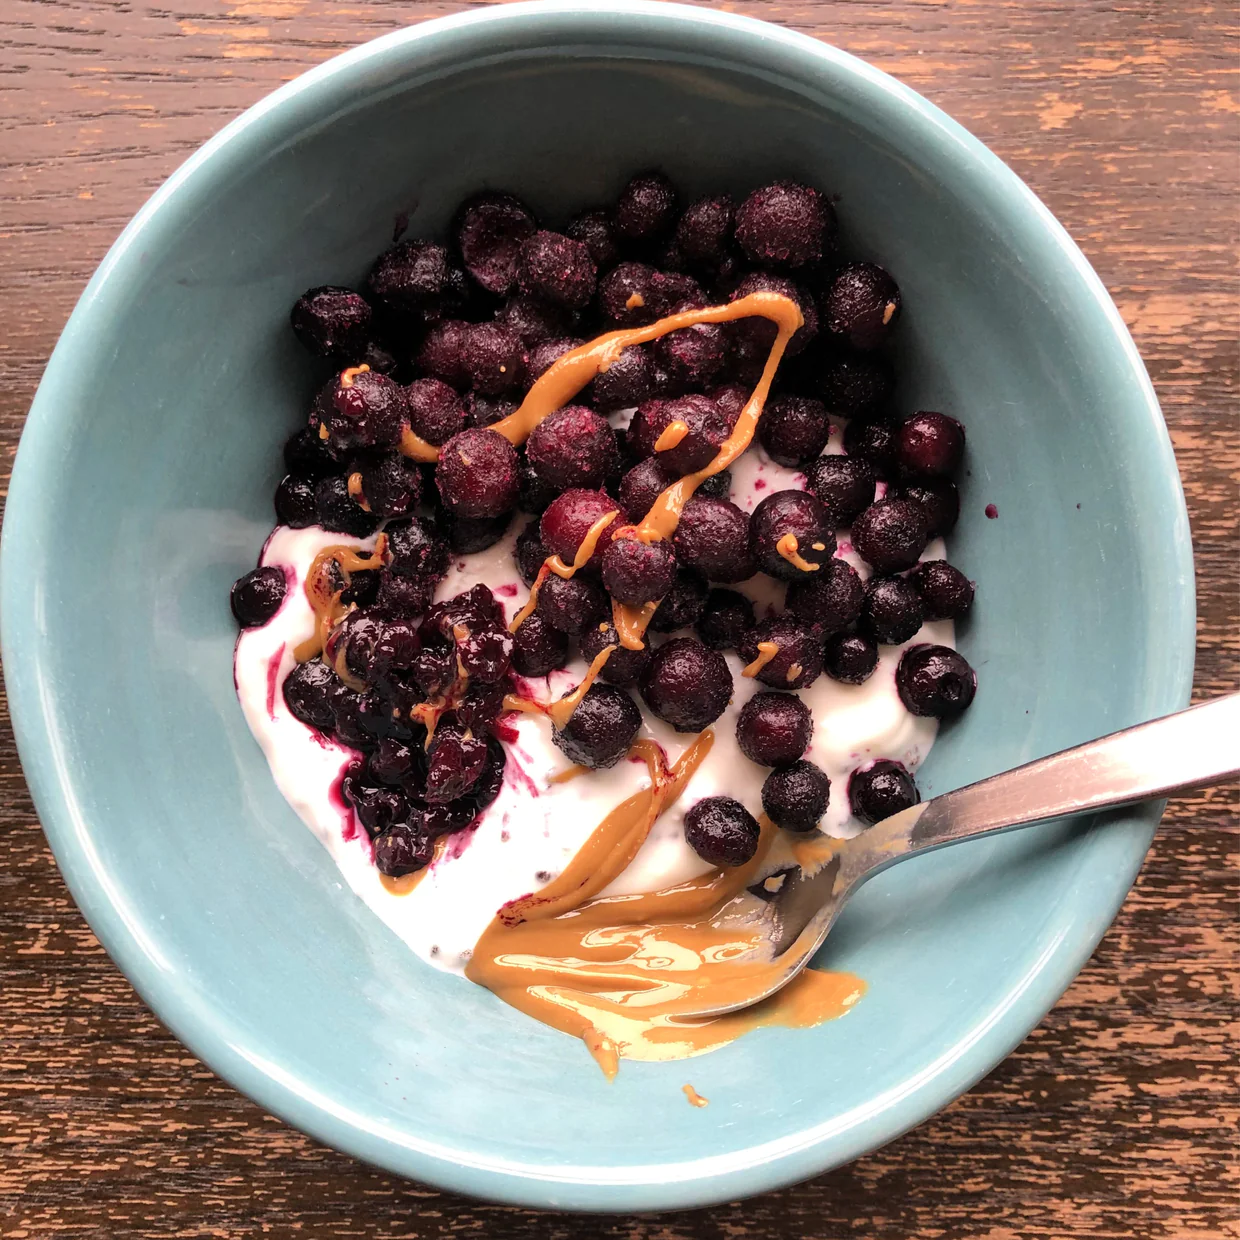 Yogurt as a Probiotic and Immune Booster